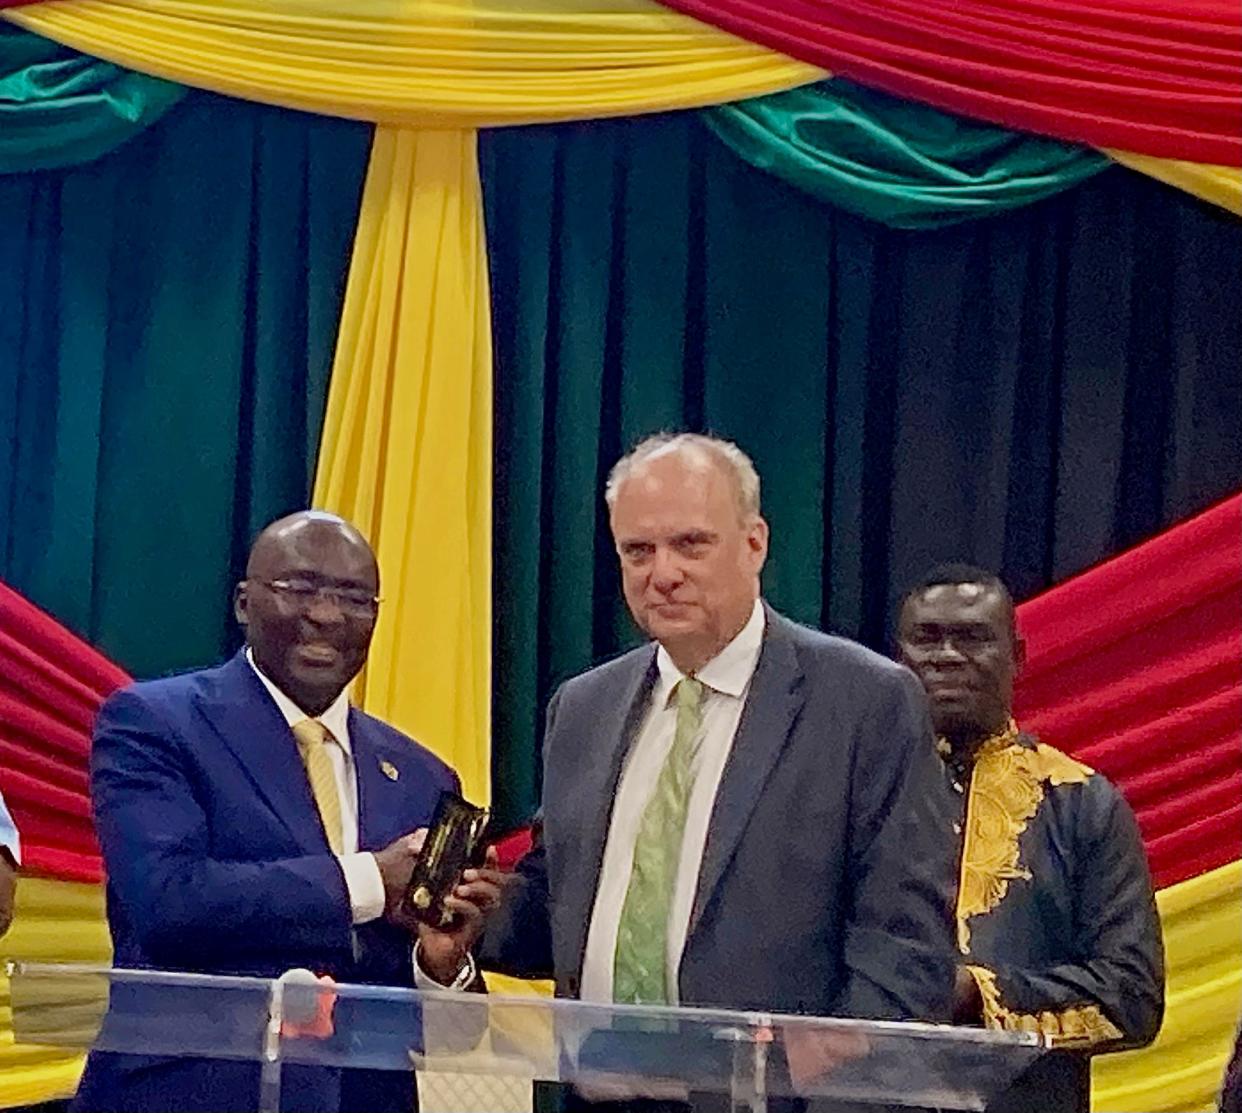 Ghanaian Vice President Mahamudu Bawumia receives a key to the city from Mayor Joseph M. Petty on a visit to Good Shepherd Methodist Church on Saturday in Worcester.